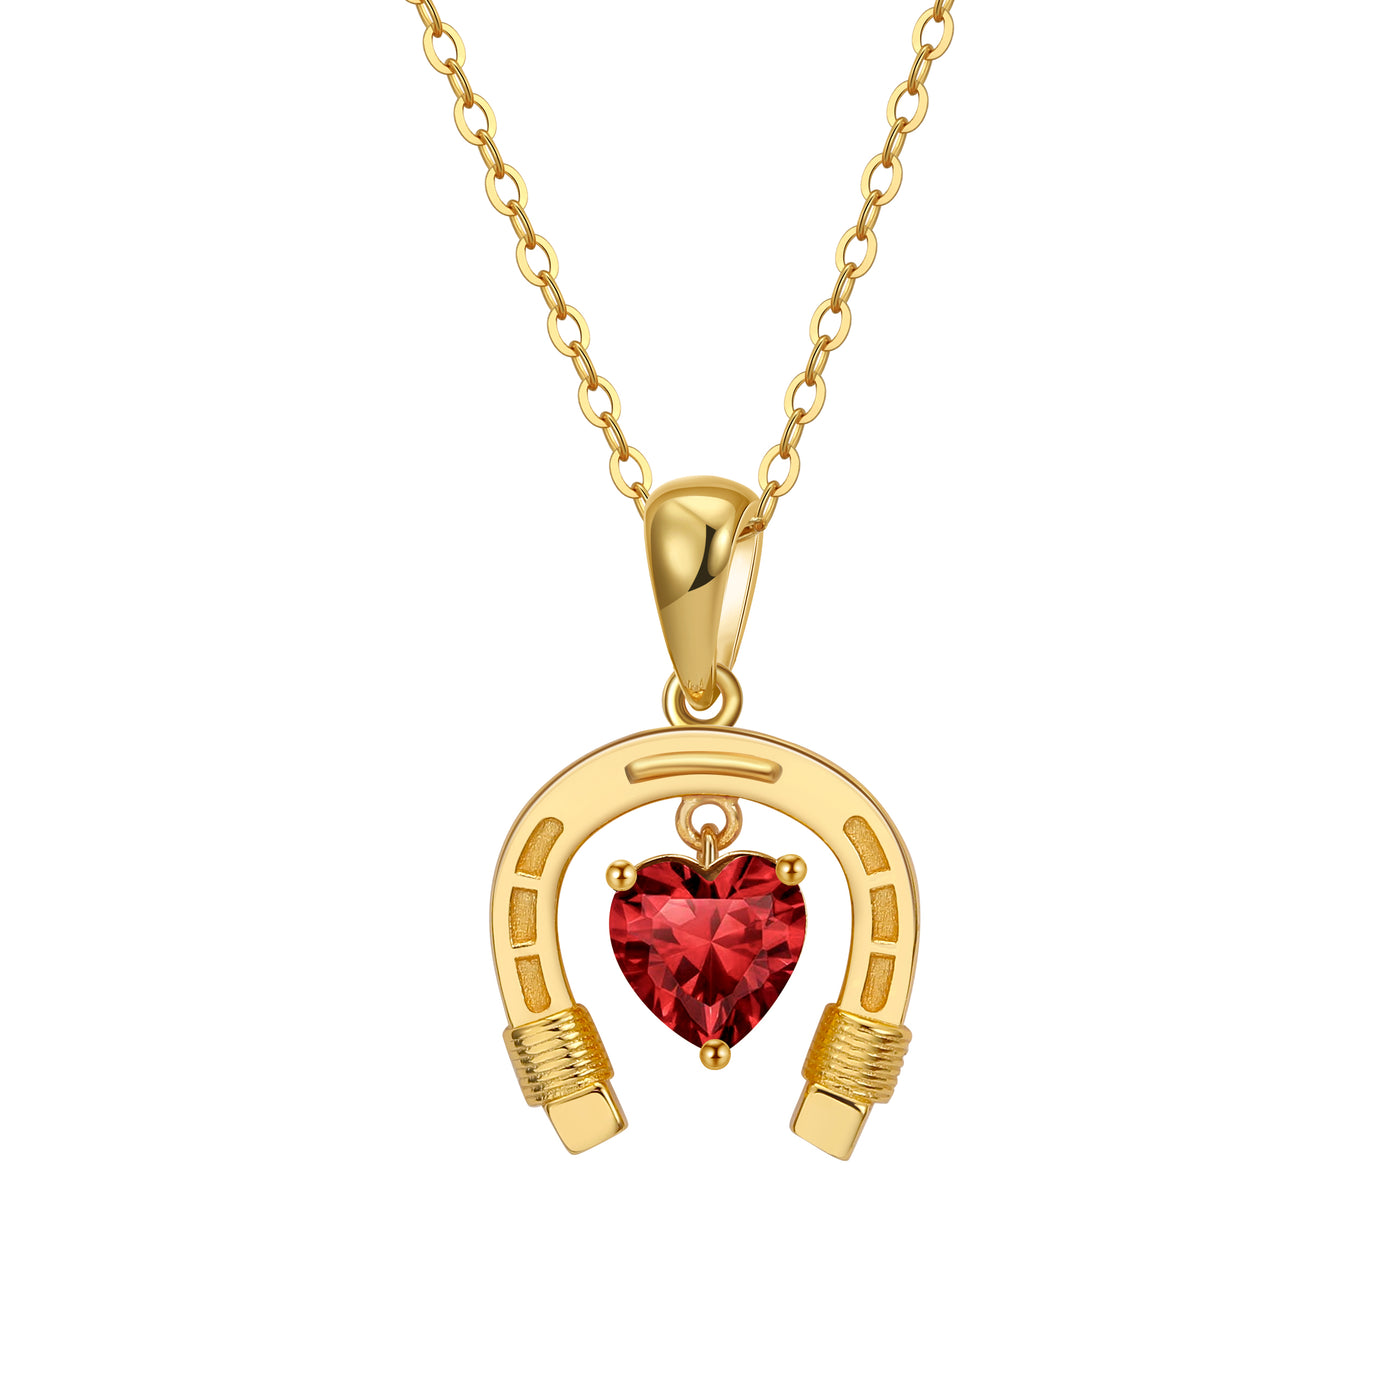 Garnet January Horseshoe Heart Birthstone Necklace Gold with Cubic Zirconia | Dark Horse Collection by Everwild Desings